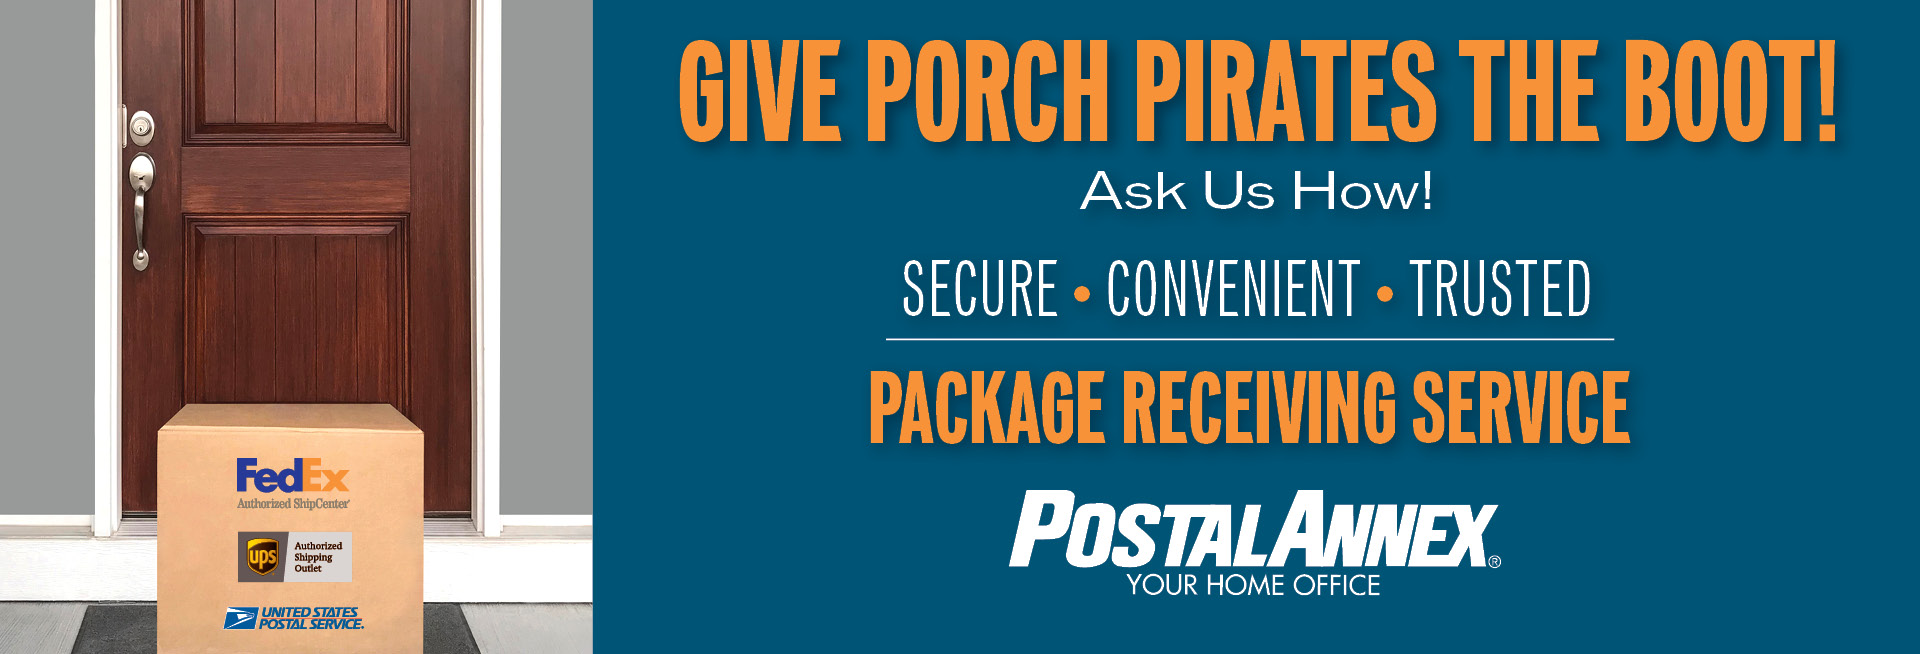 Package Receiving Services in Missouri City